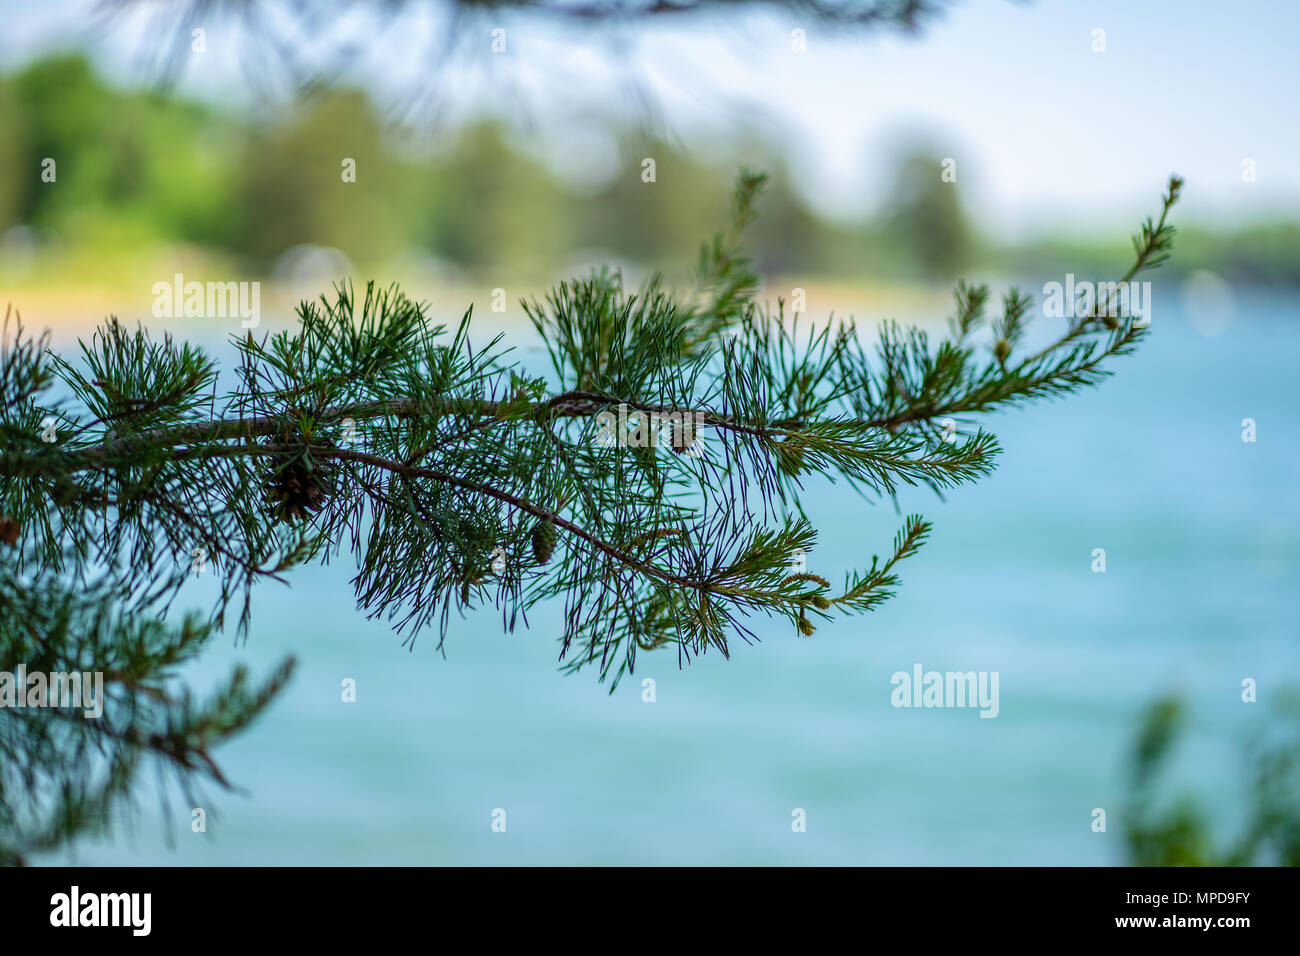 Contrast between a pine tree and a lake beach sight. Stress-free summer paradise. Stock Photo